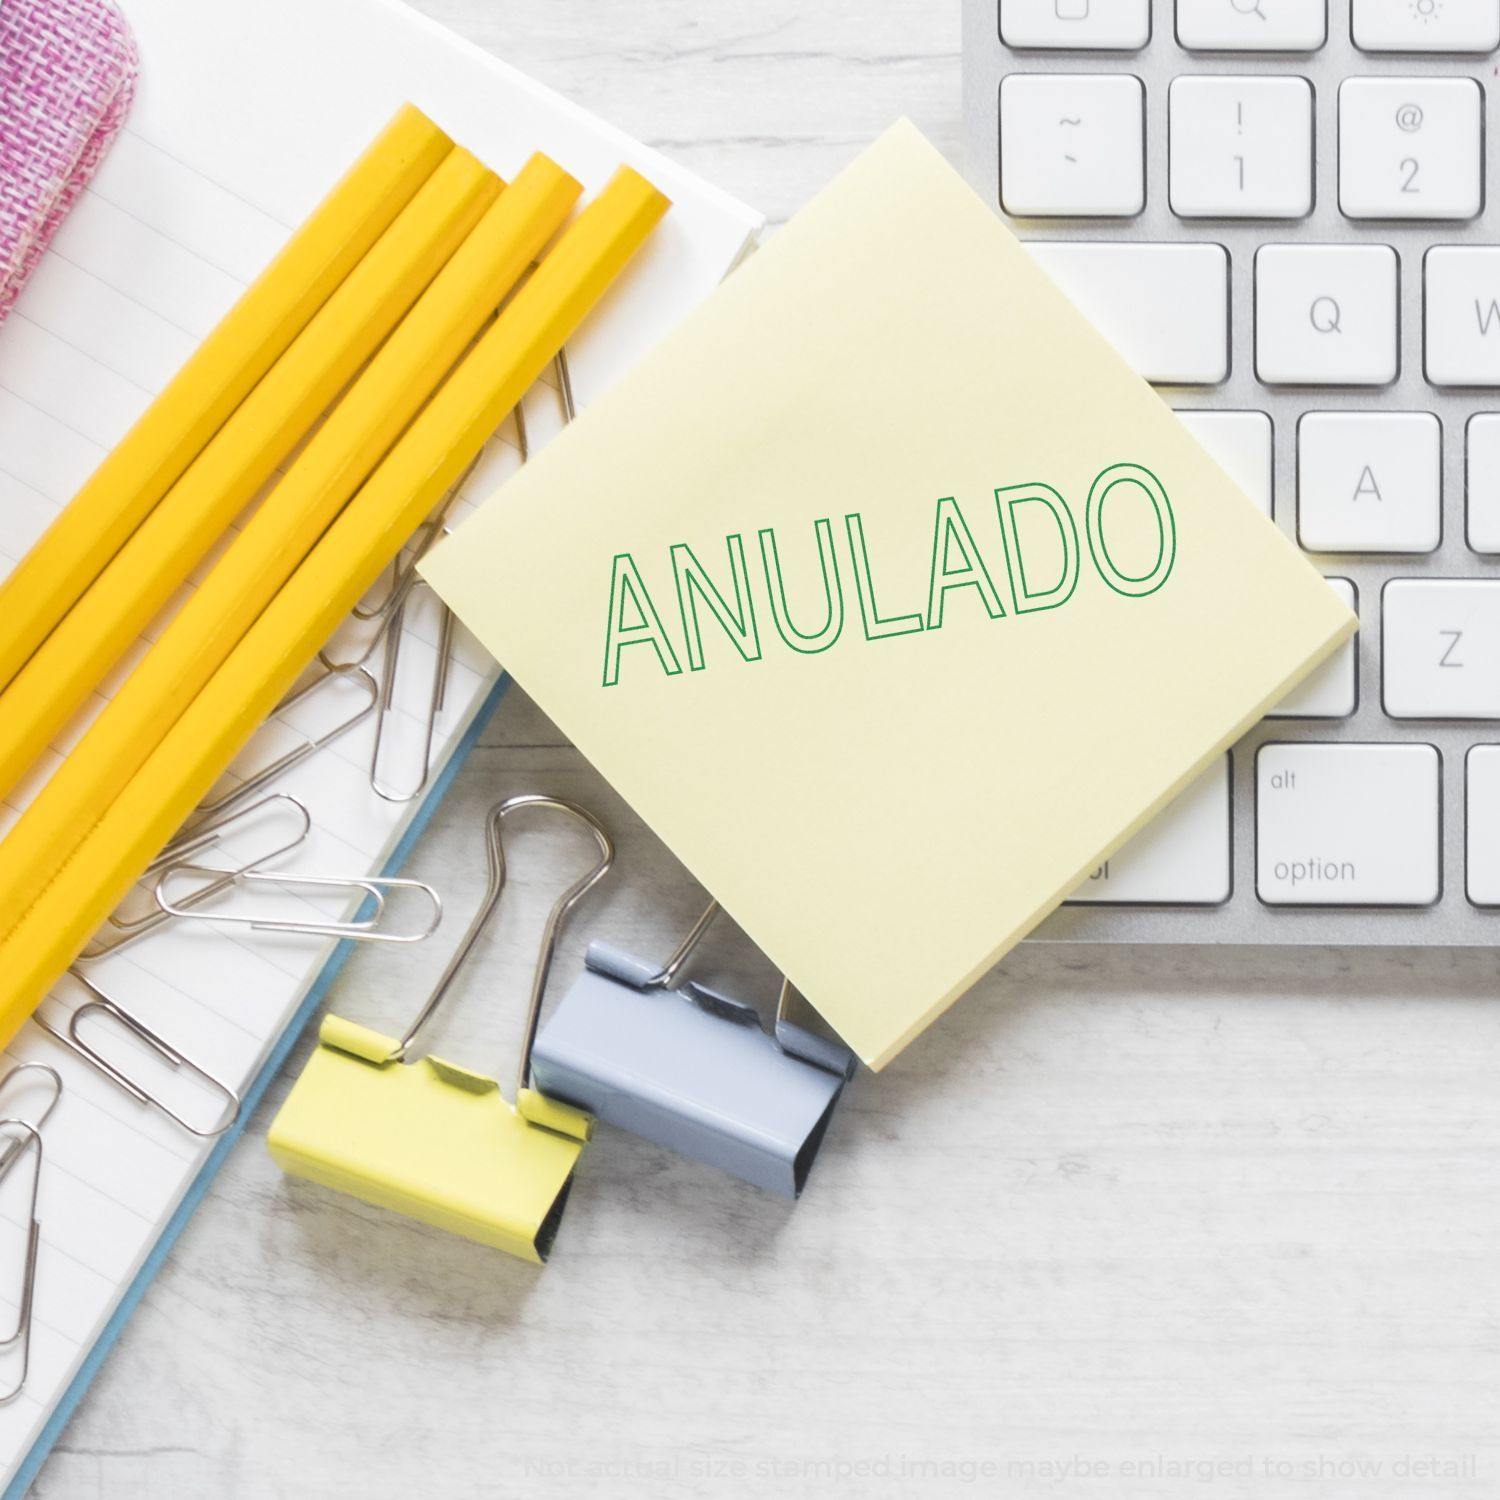 A stock office rubber stamp with a stamped image showing how the text "ANULADO" in a large outline font is displayed after stamping.